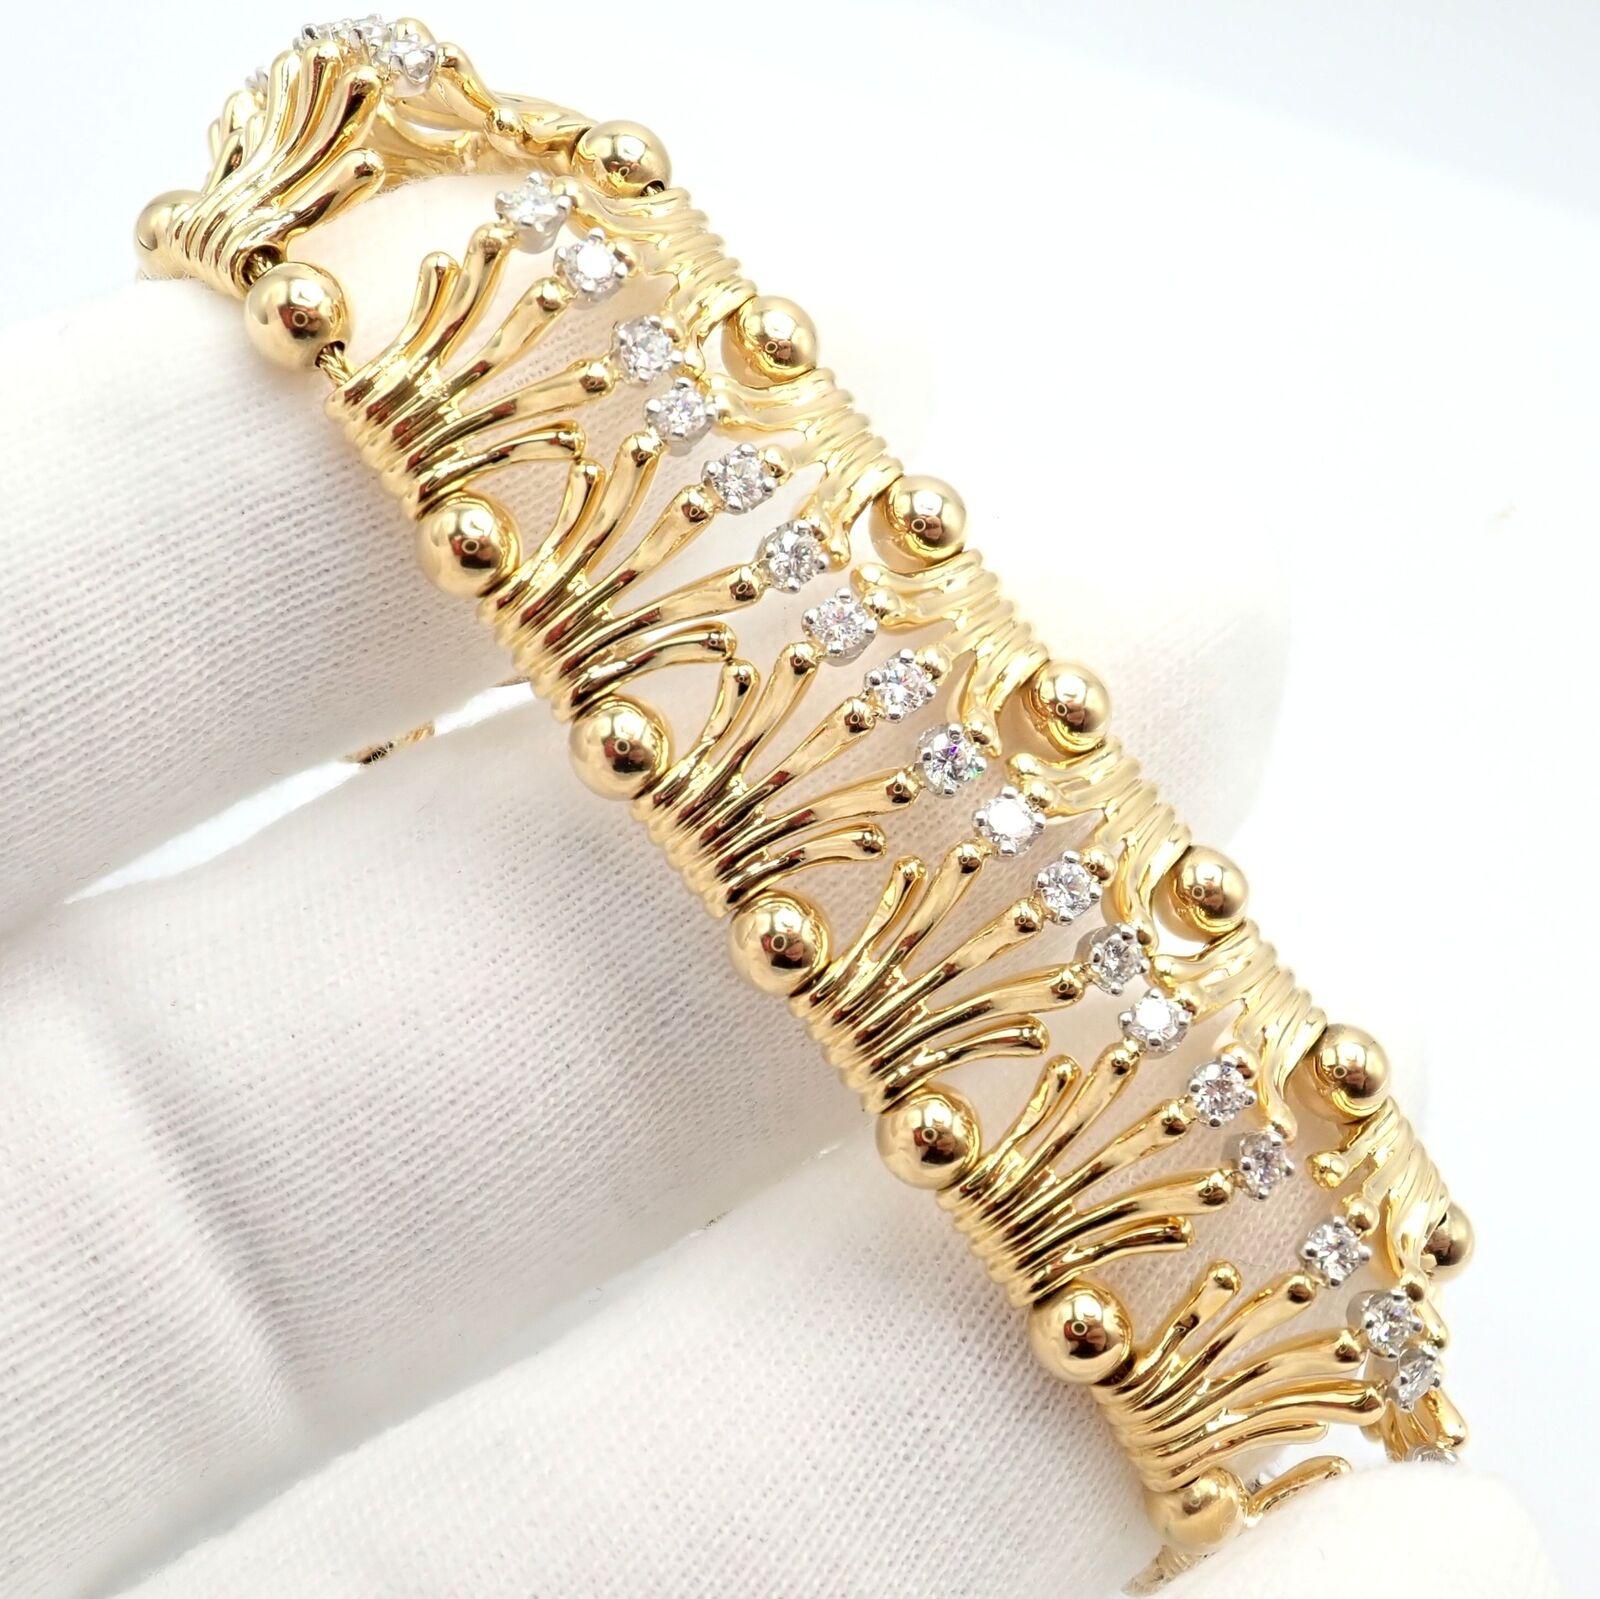 Tiffany & Co Jean Schlumberger Diamond Yellow Gold And Platinum Hands Bracelet For Sale 2